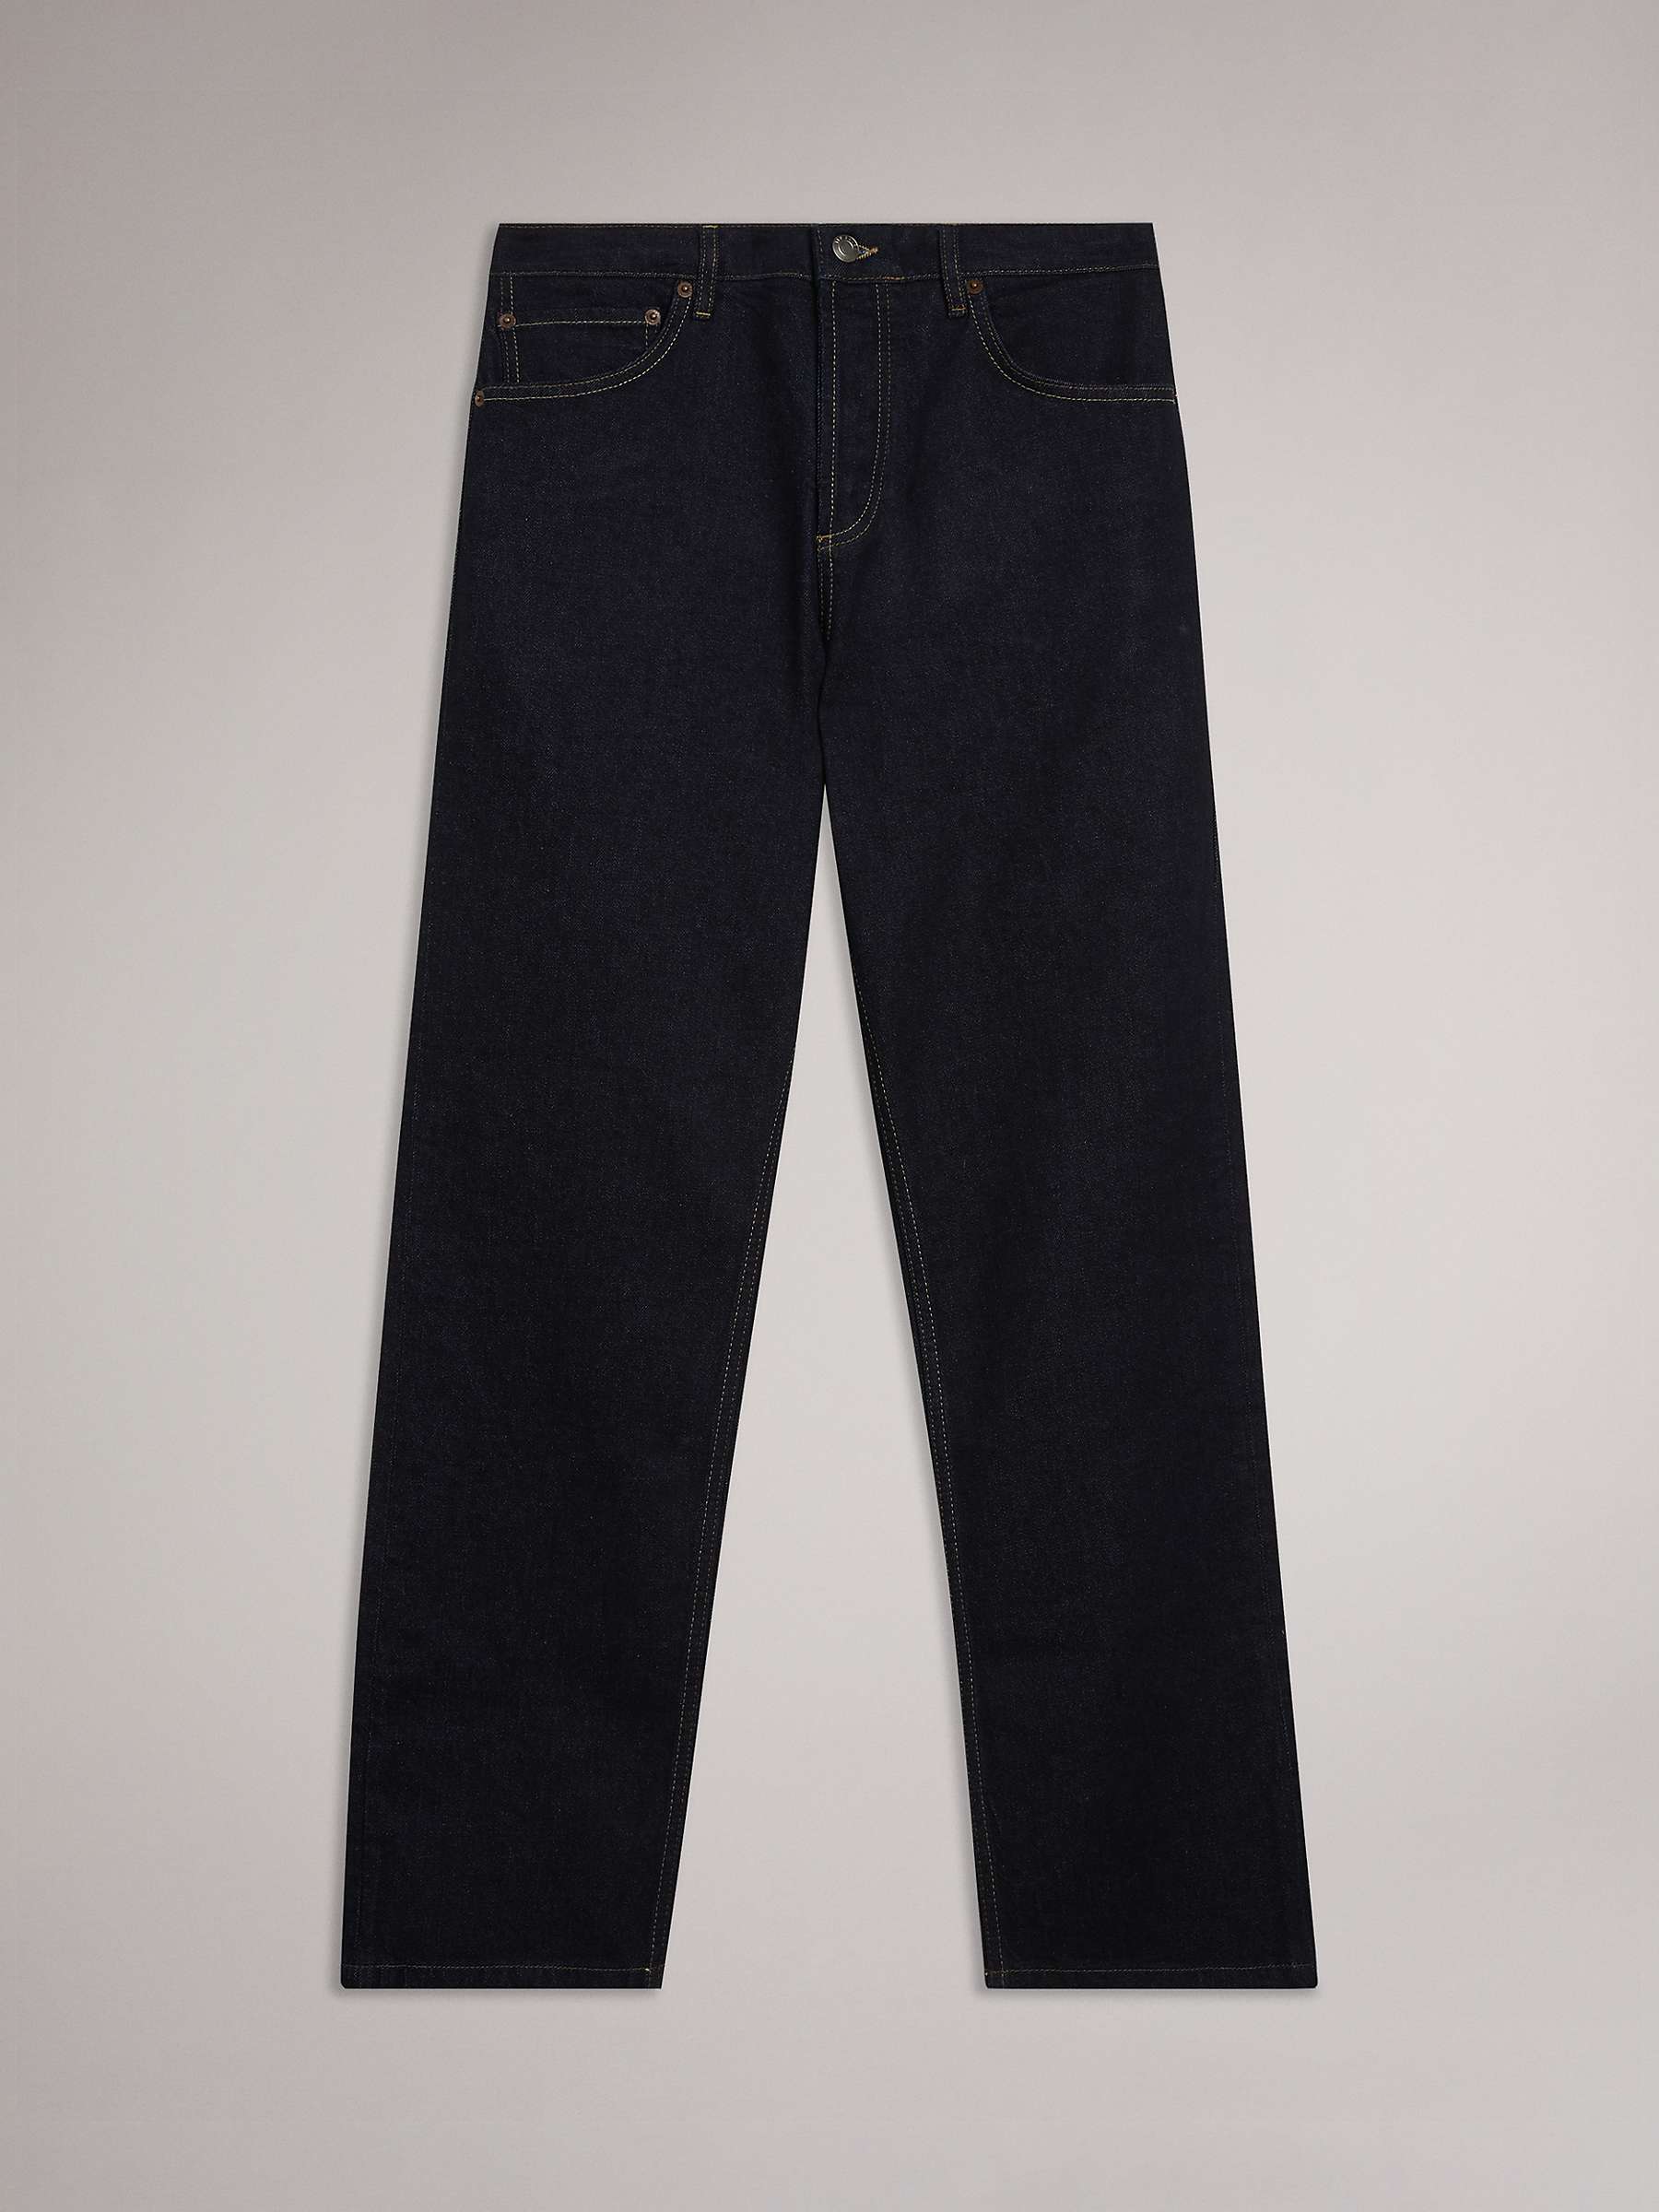 Buy Ted Baker Joeyy Straight Fit Stretch Jeans, Dark Blue Online at johnlewis.com